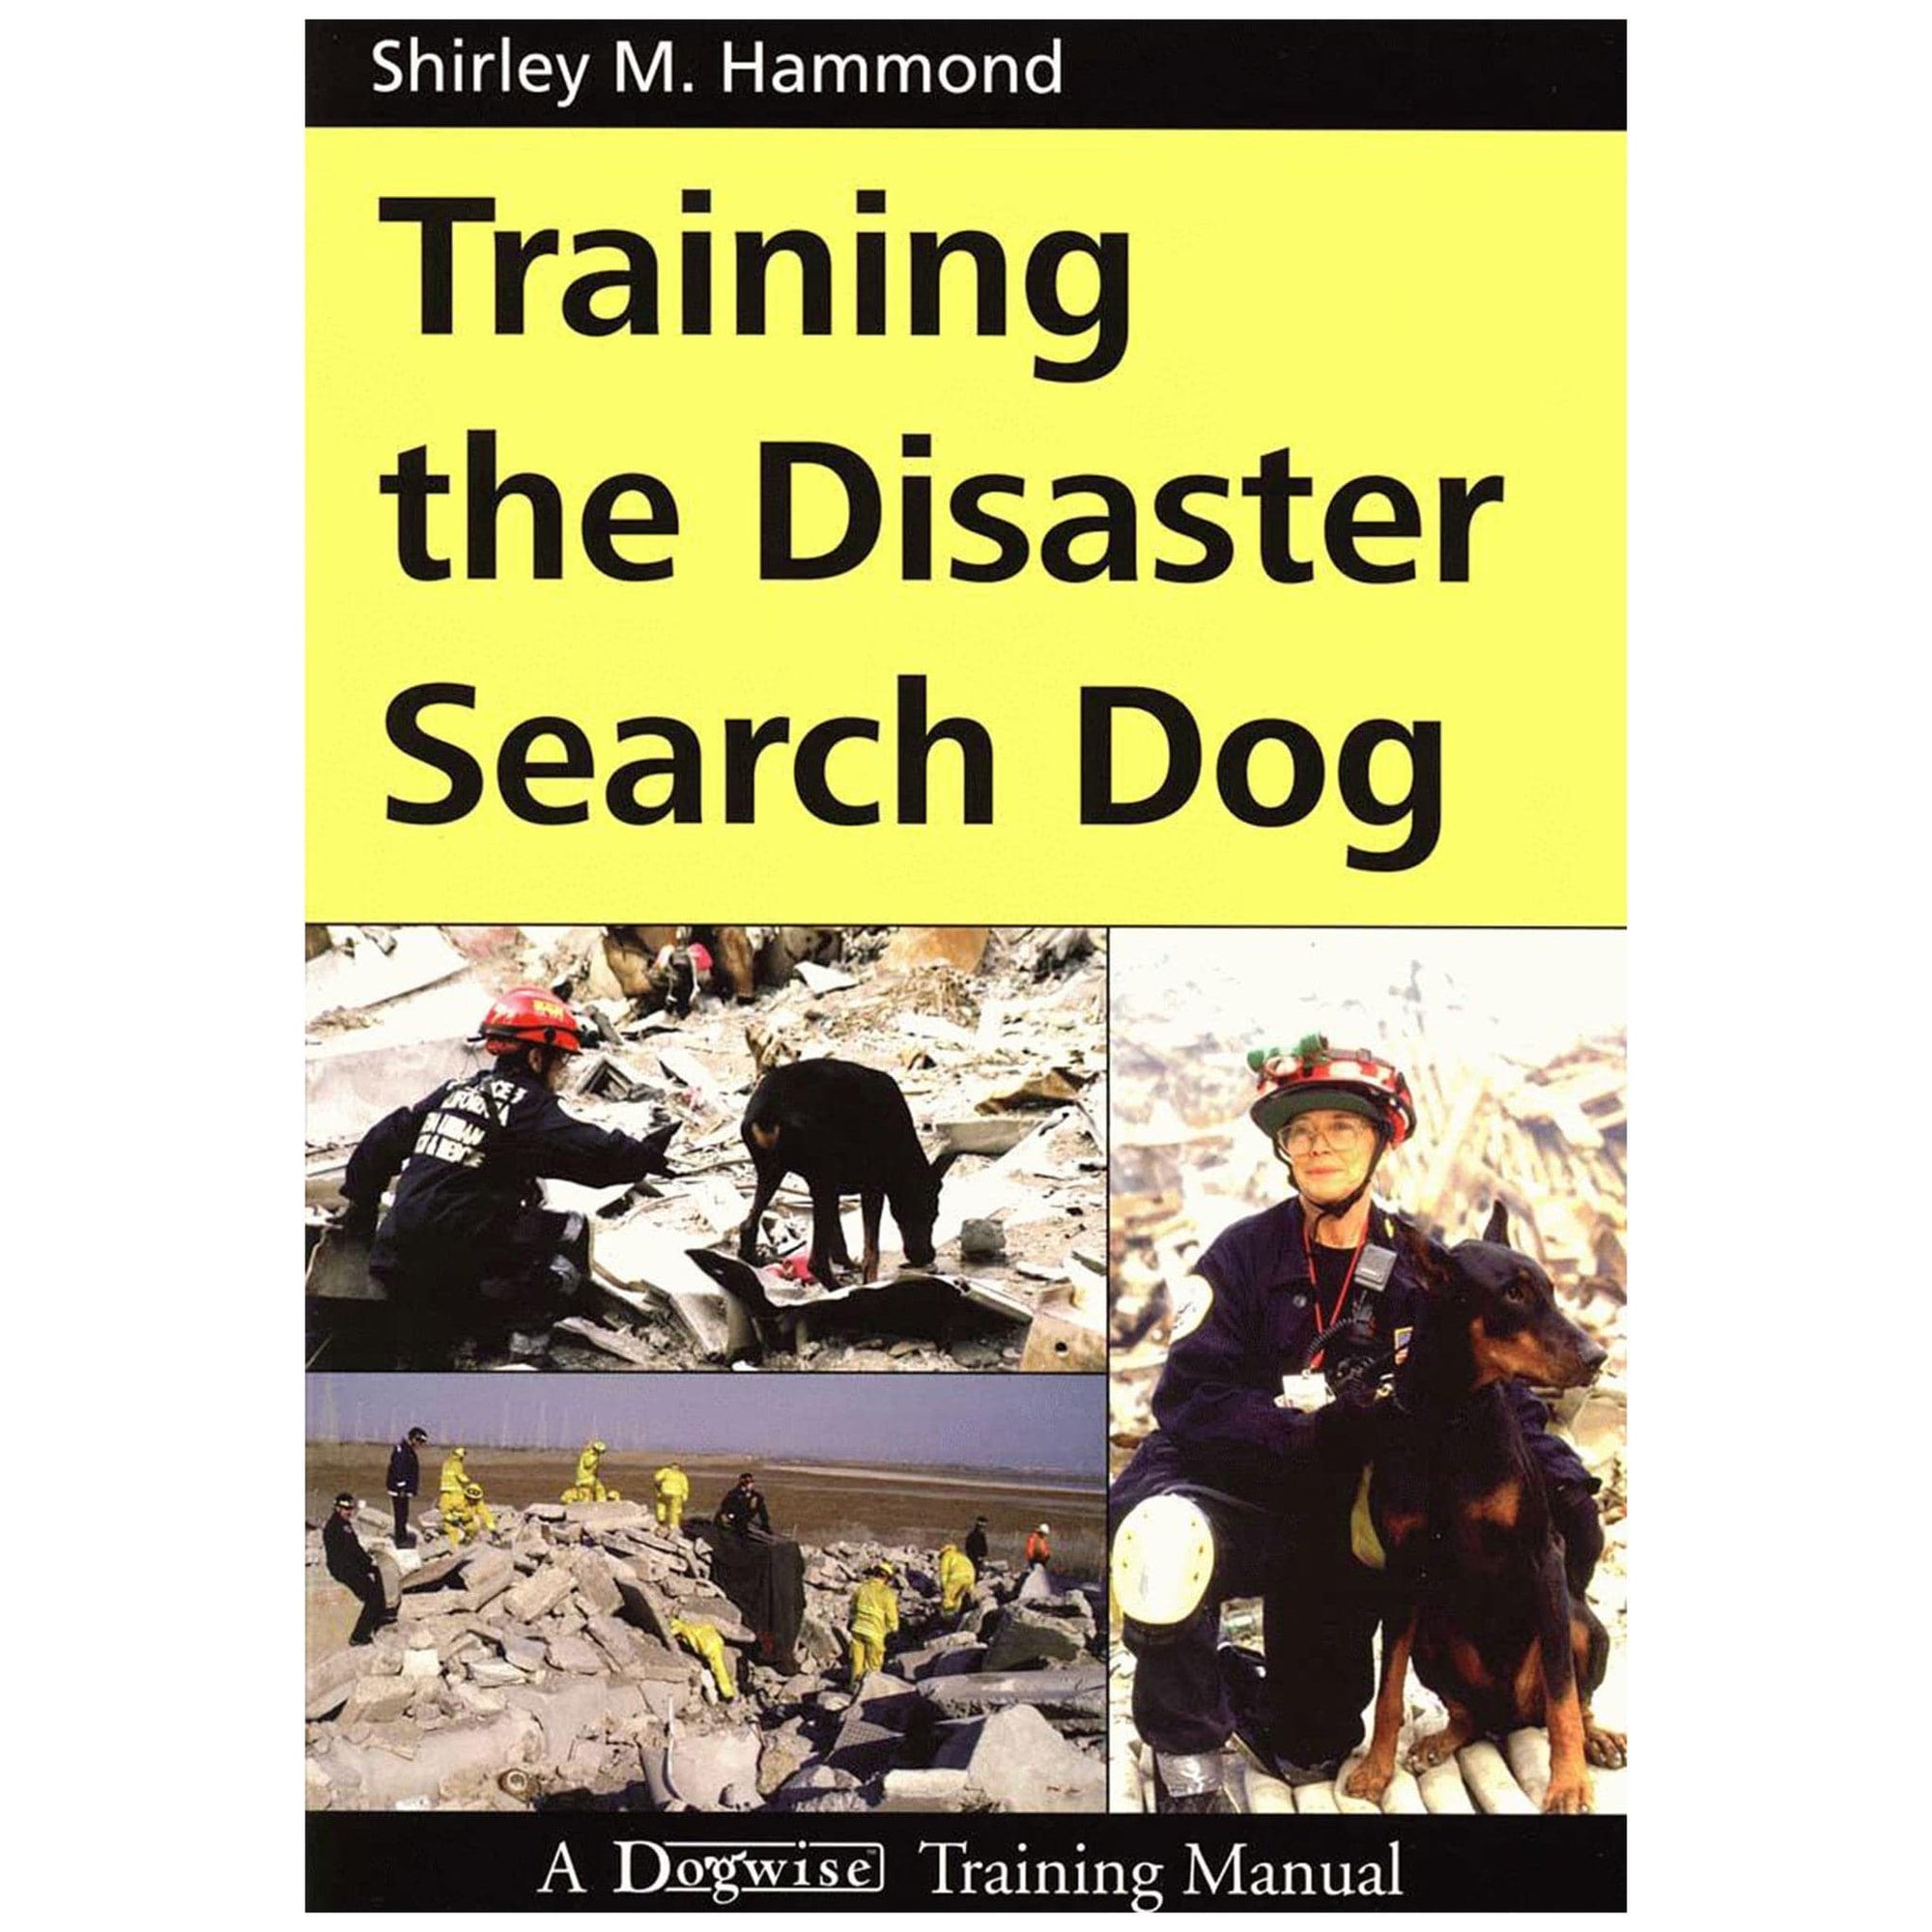 Training the Disaster Search Dog   e-book